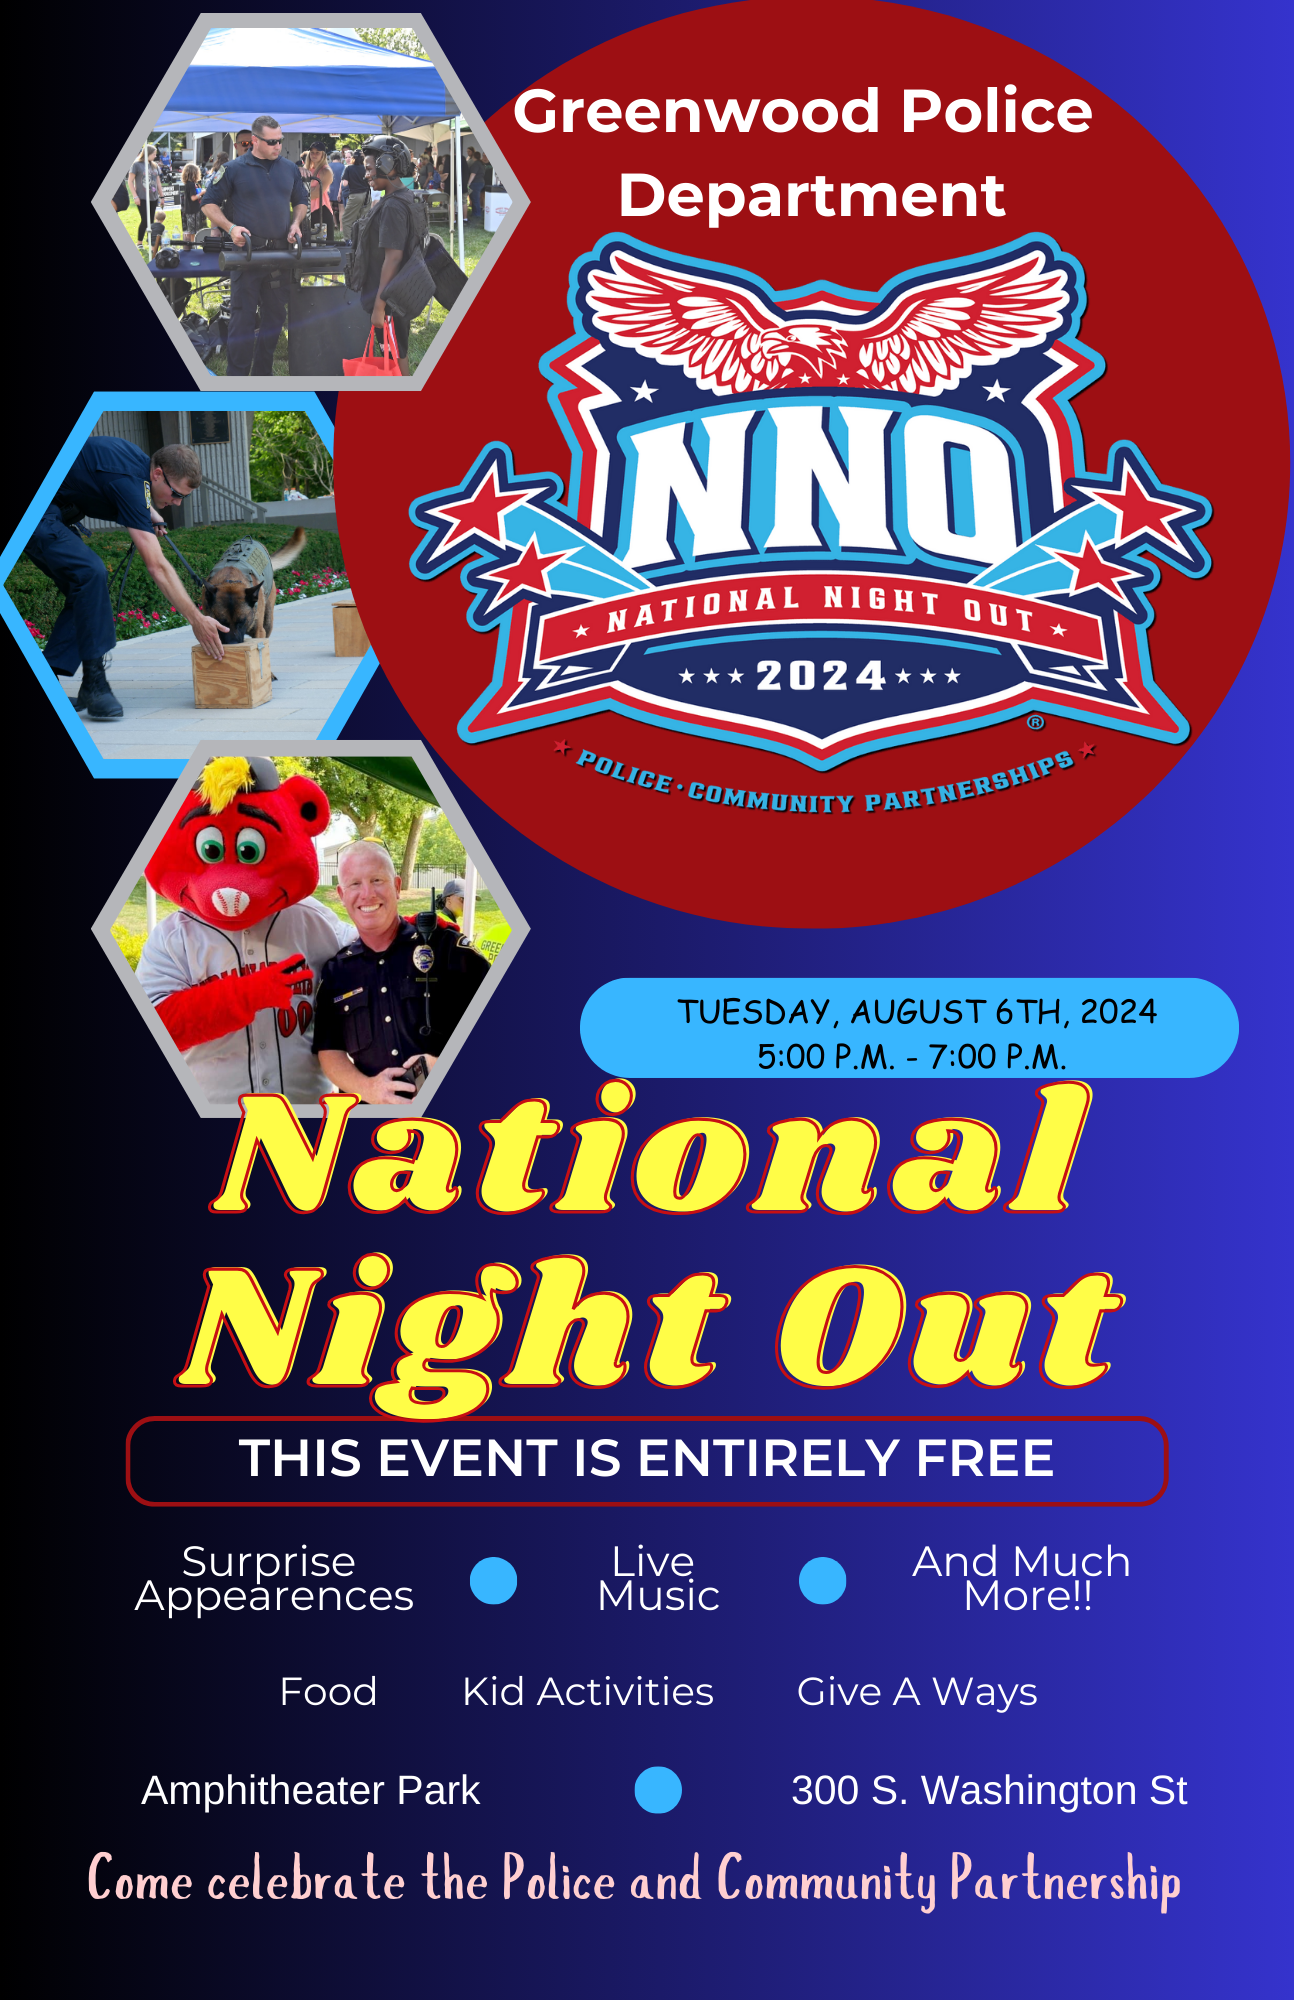 Image of advertisement for Greenwood Police Department's National Night Out event